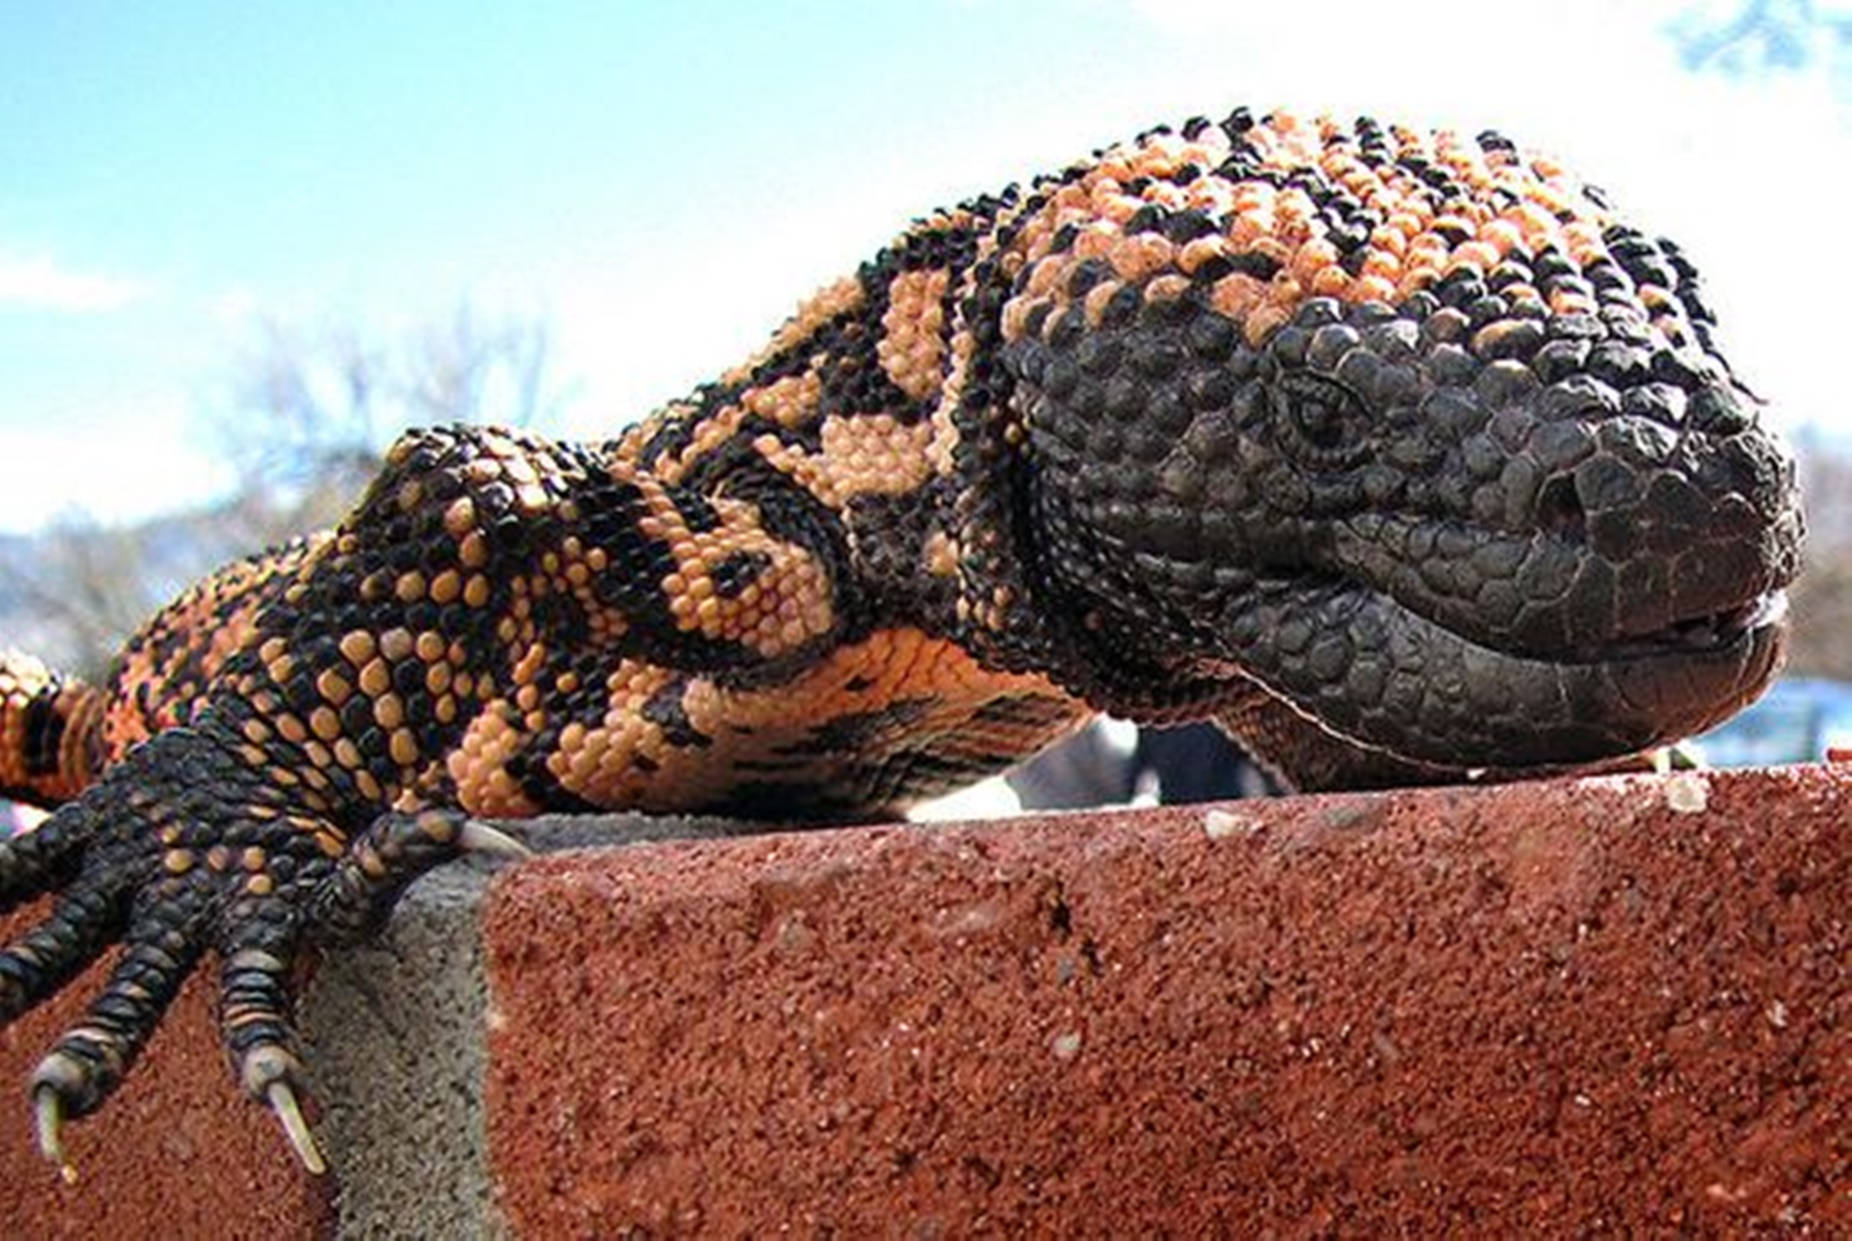 Caption: A Vibrant Gila Monster Luxuriating on Red Brick Wallpaper